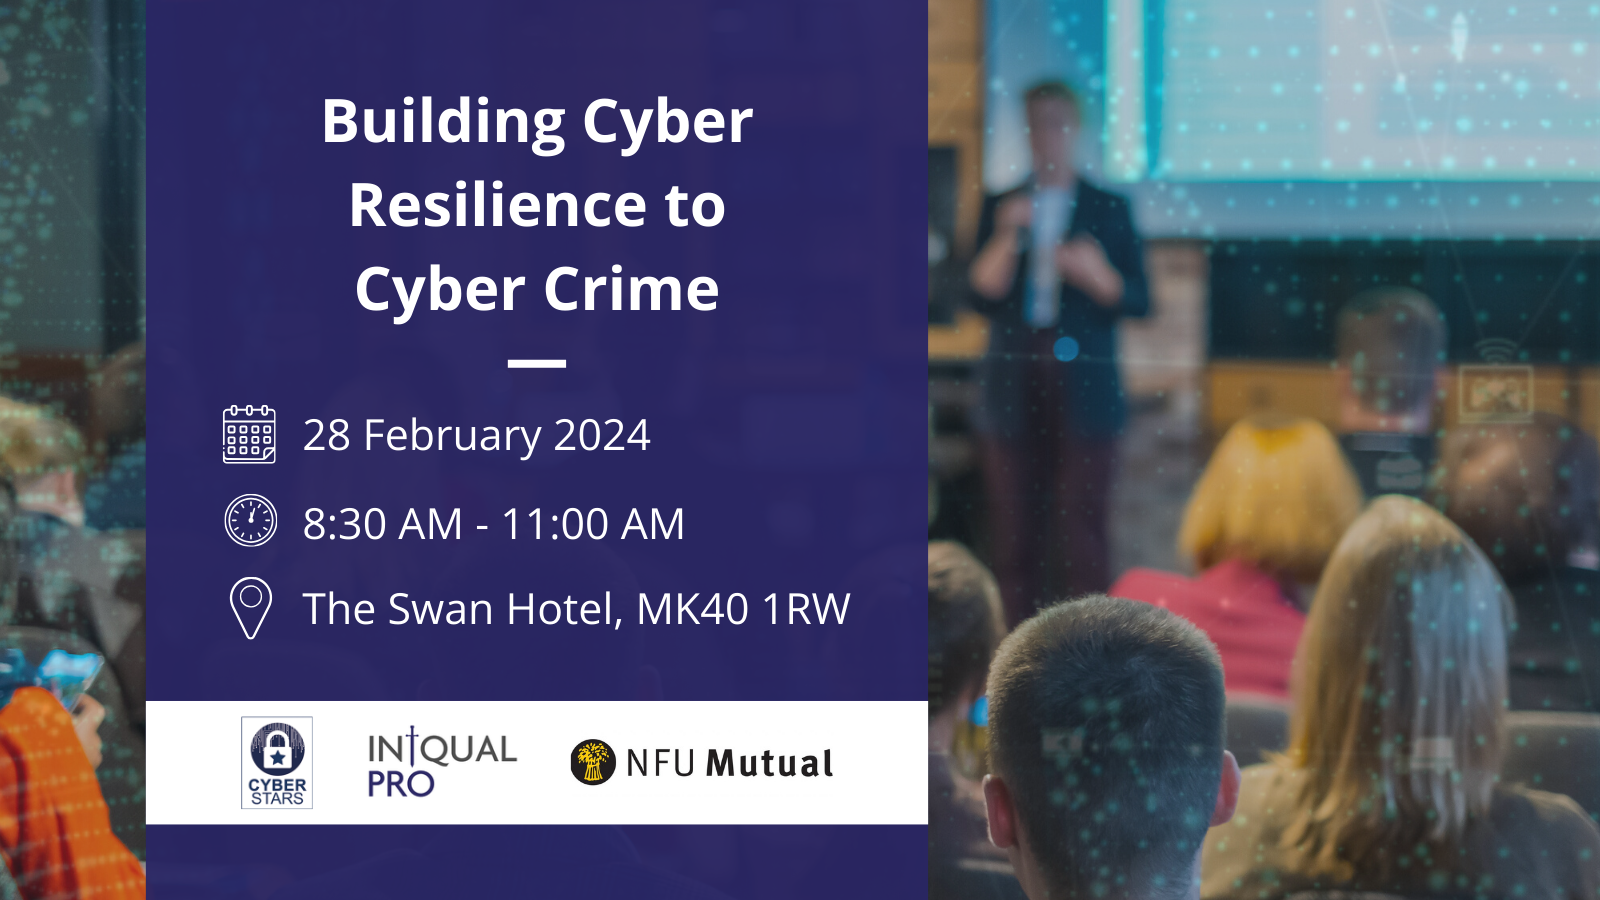 Building Cyber Resilience to Cyber Crime